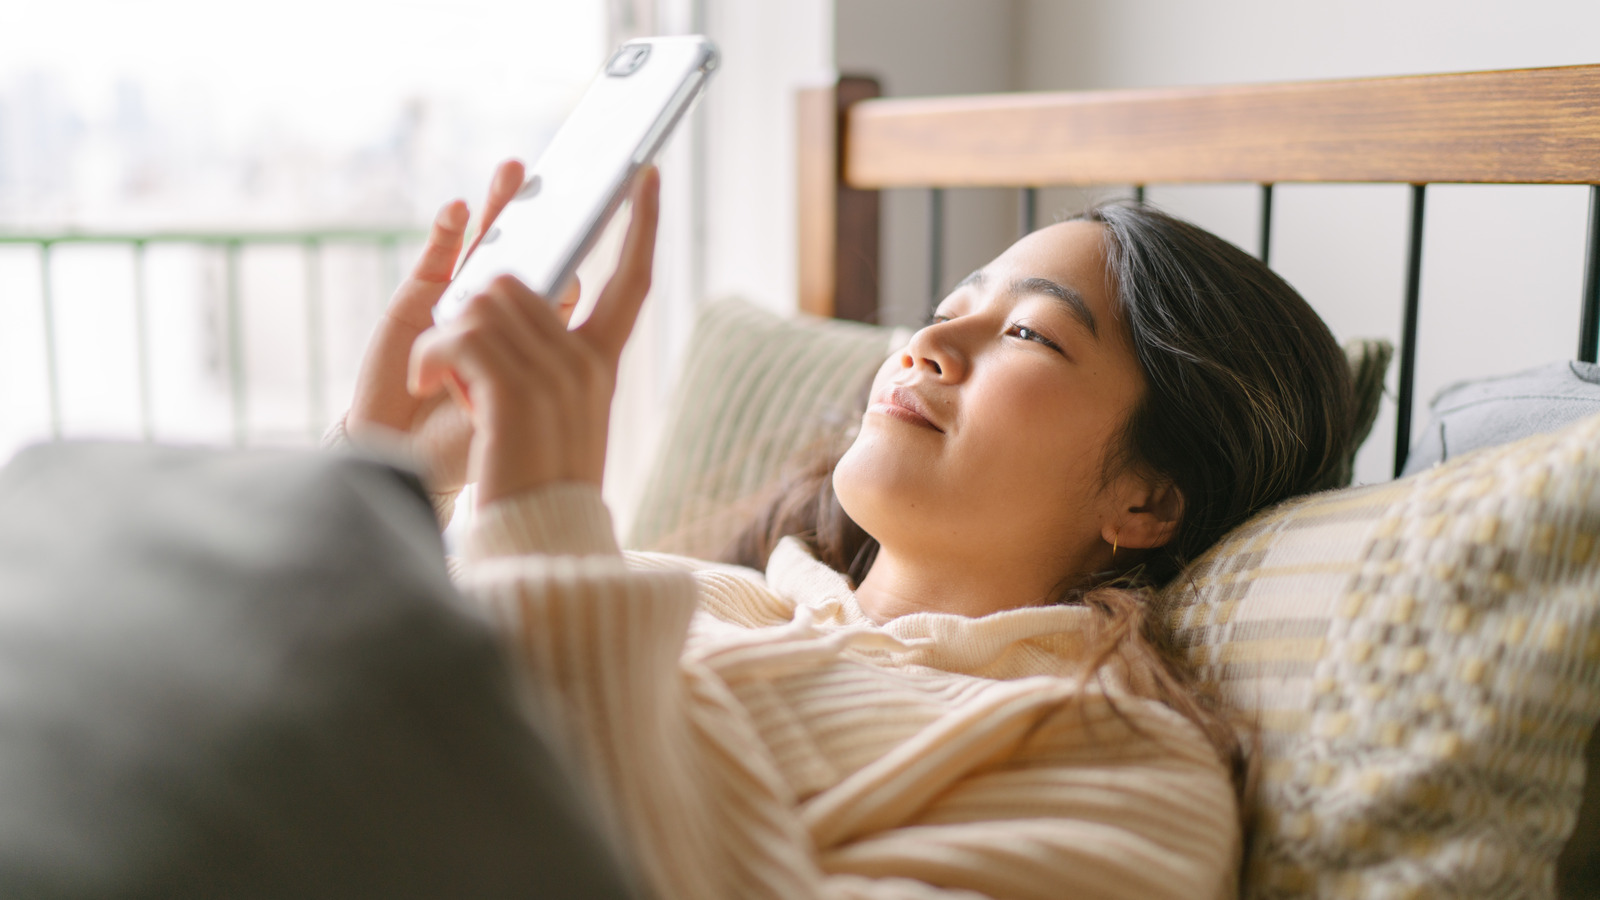 What Happens To Your Brain When You Look At Your Phone First Thing In The Morning - Health Digest